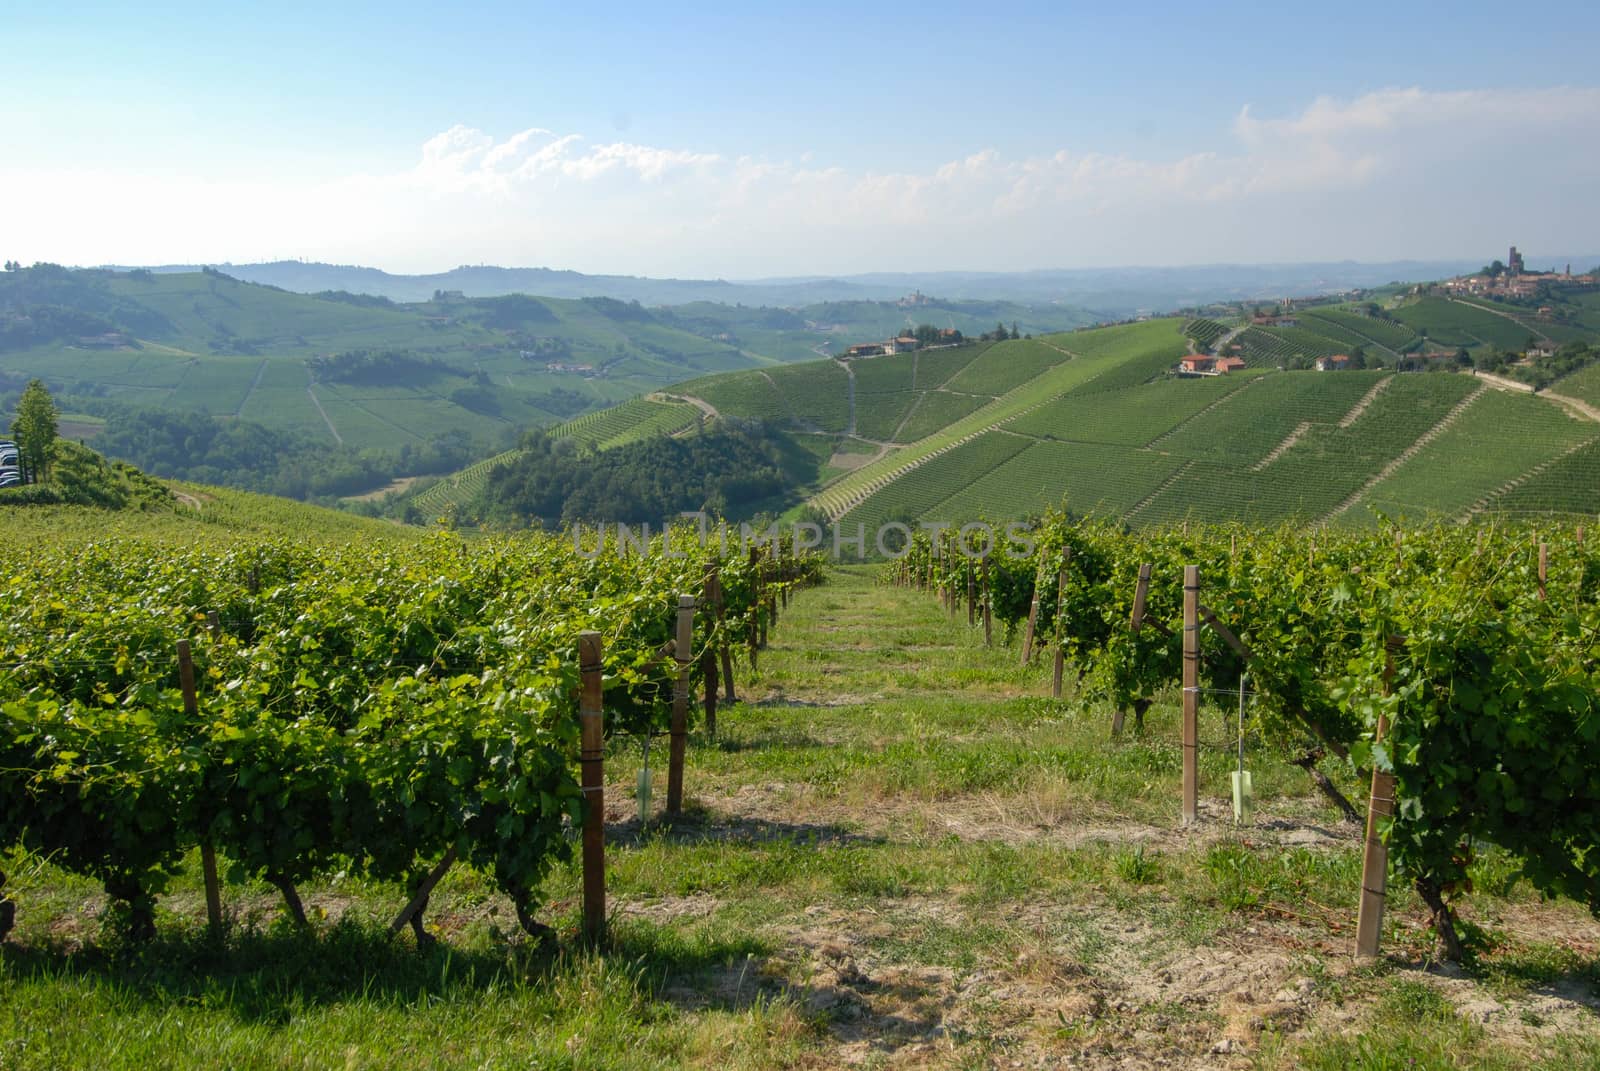 A view of vineyards in the Langhe, Piedmont - Italy by cosca